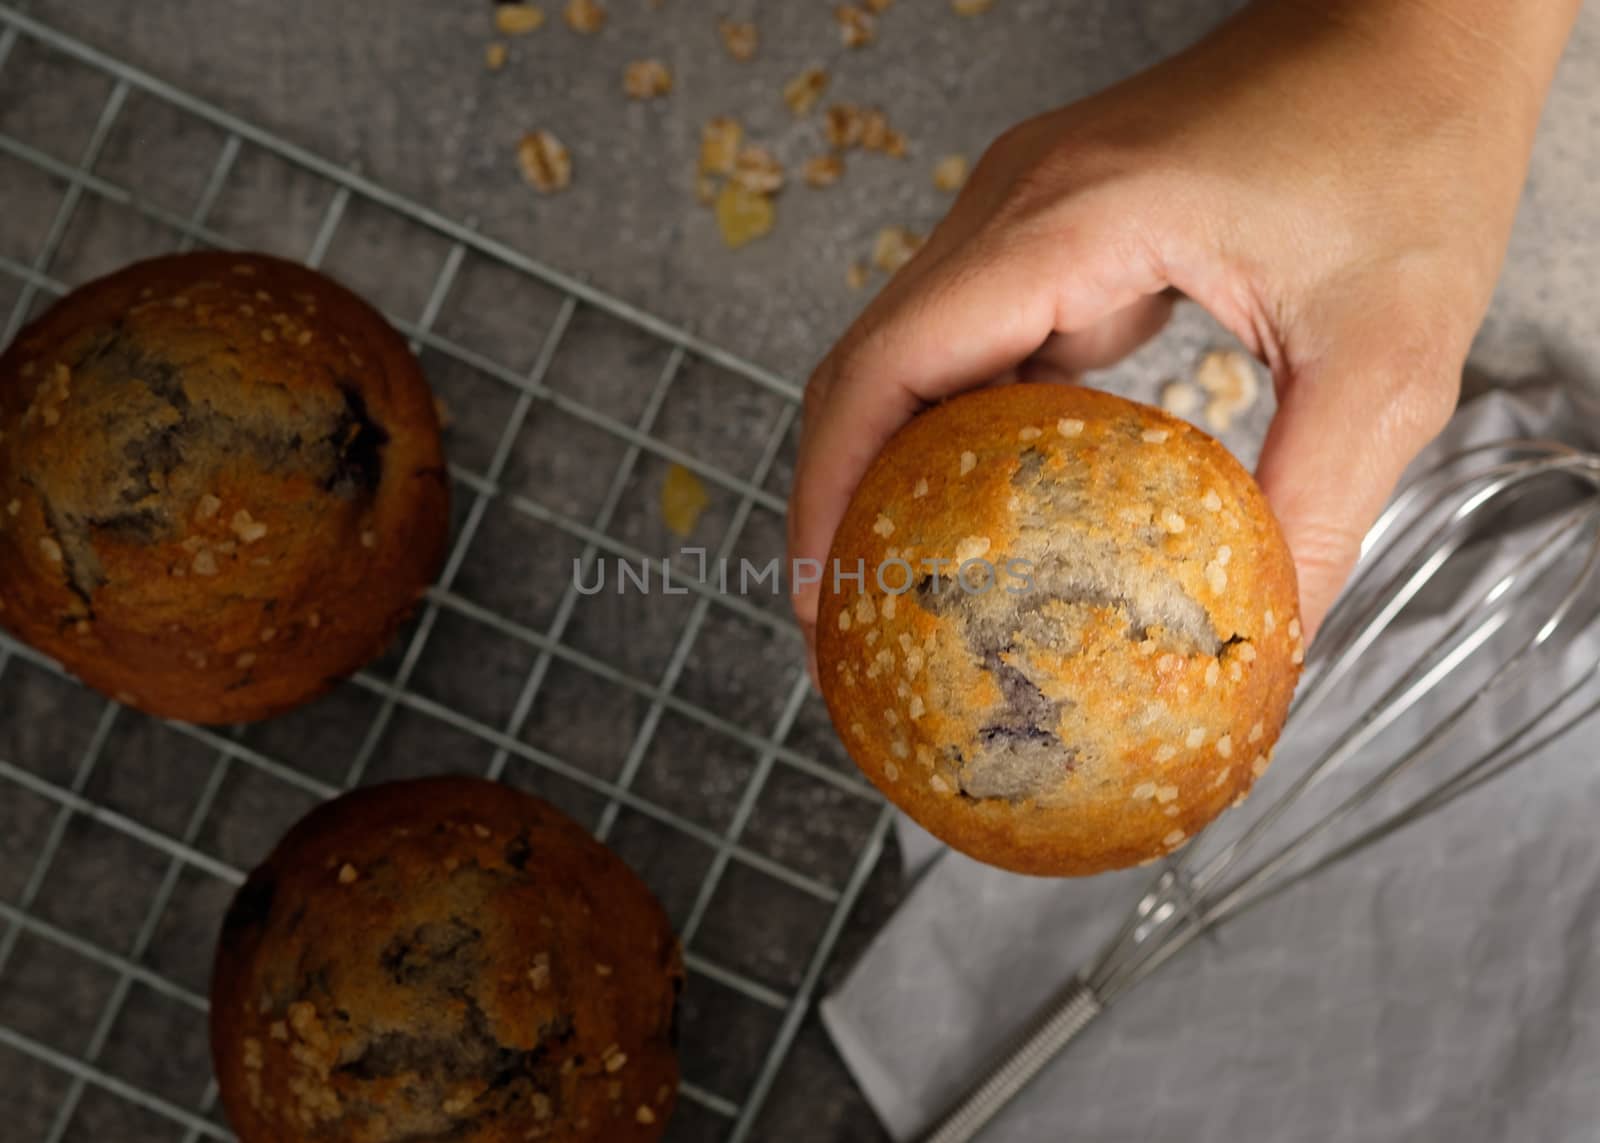 Hands holding a muffin look delicious.  by feelartfeelant